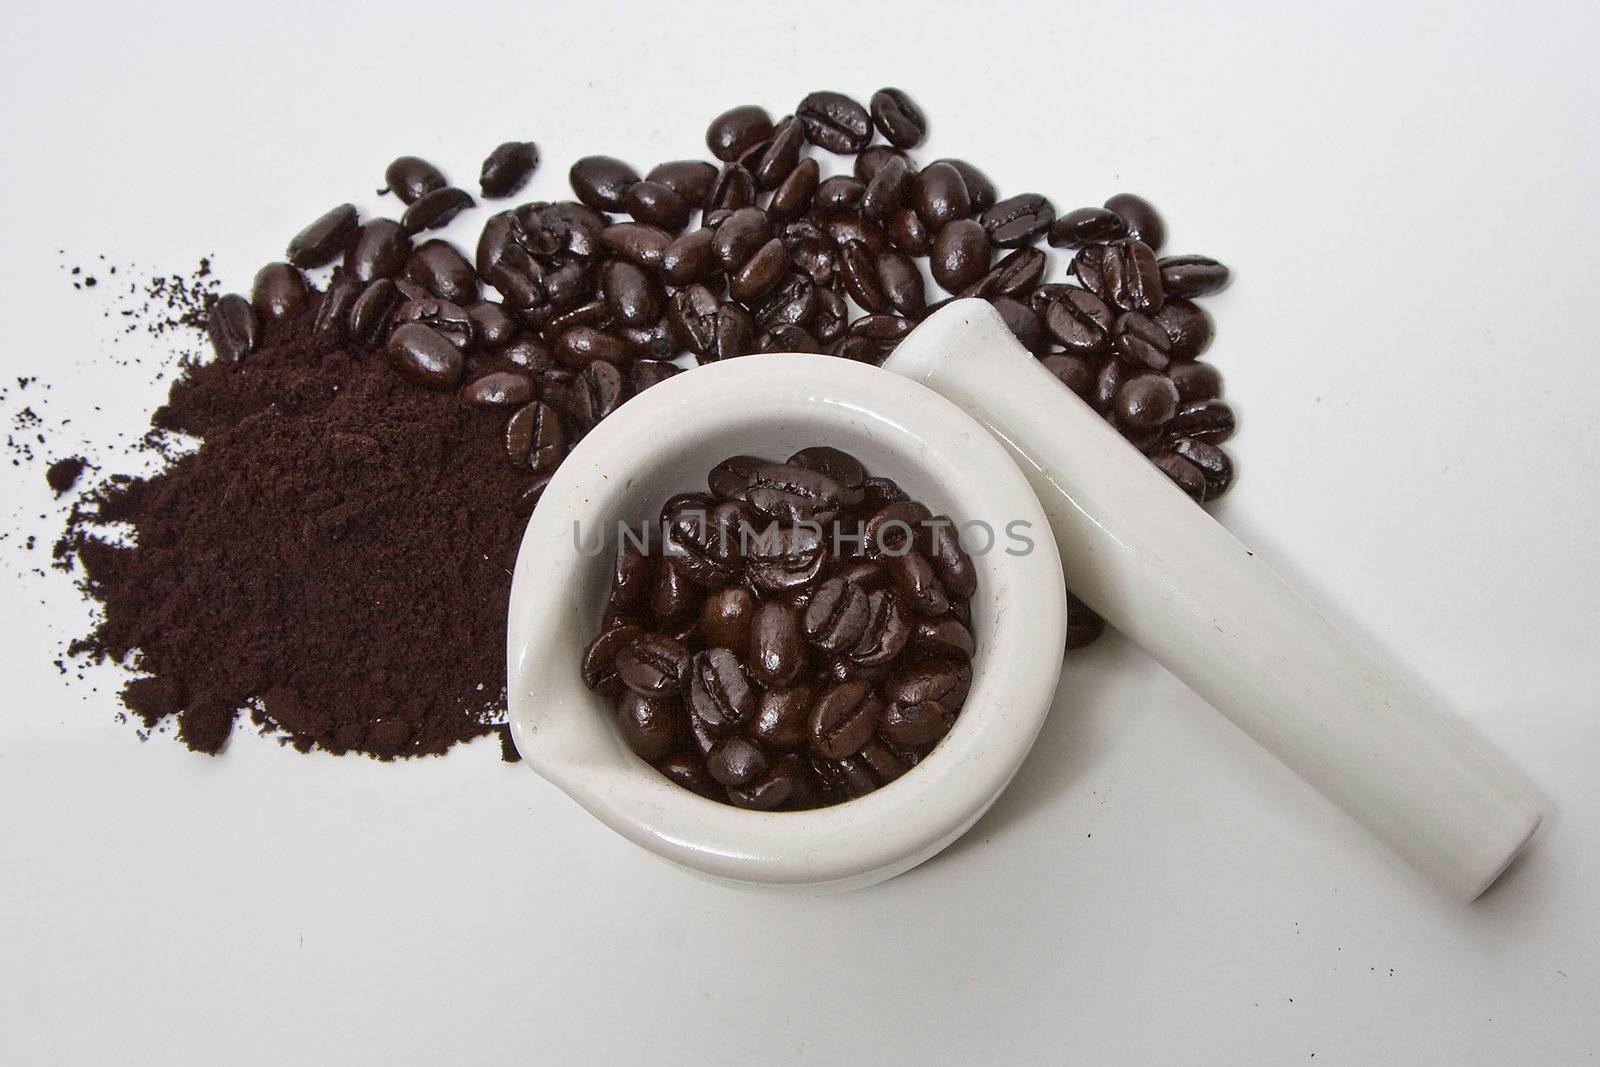 A mortar filled with freshly roasted gourmet coffee beans, with coffee beans and grind next to it isolated on a white background